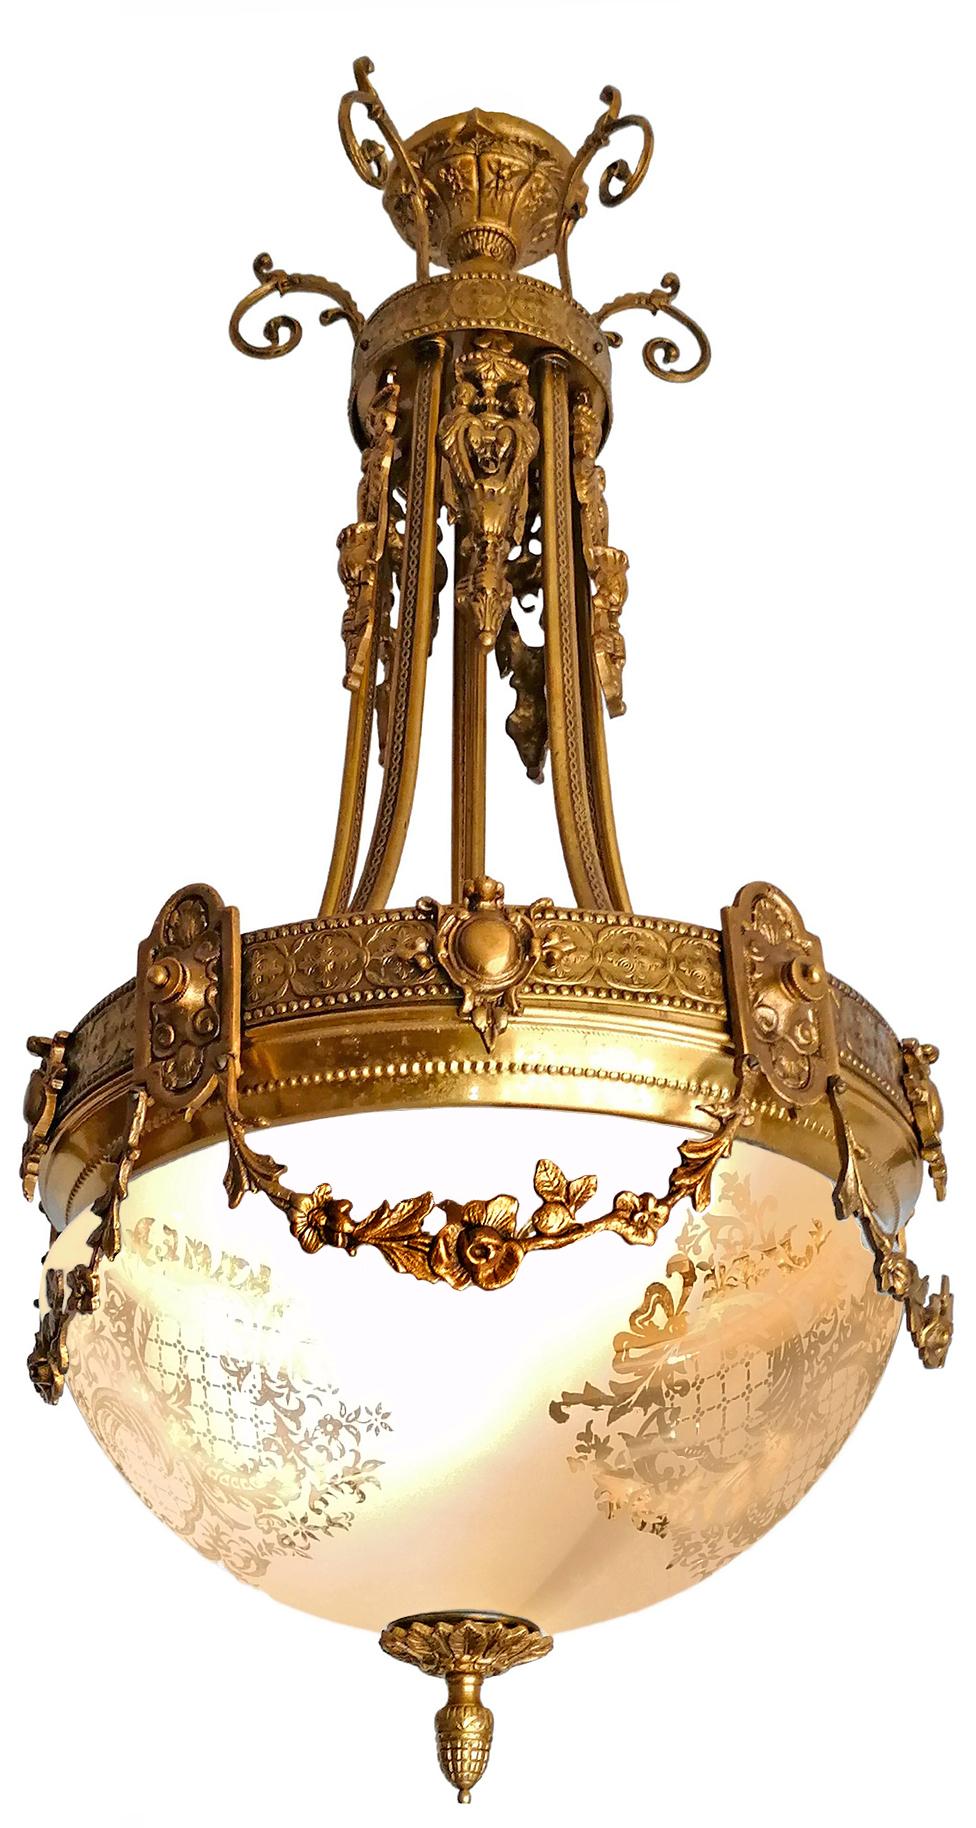 French Art Nouveau and Art Deco Chandelier in Gilt Bronze and Empire Caryatids For Sale 4